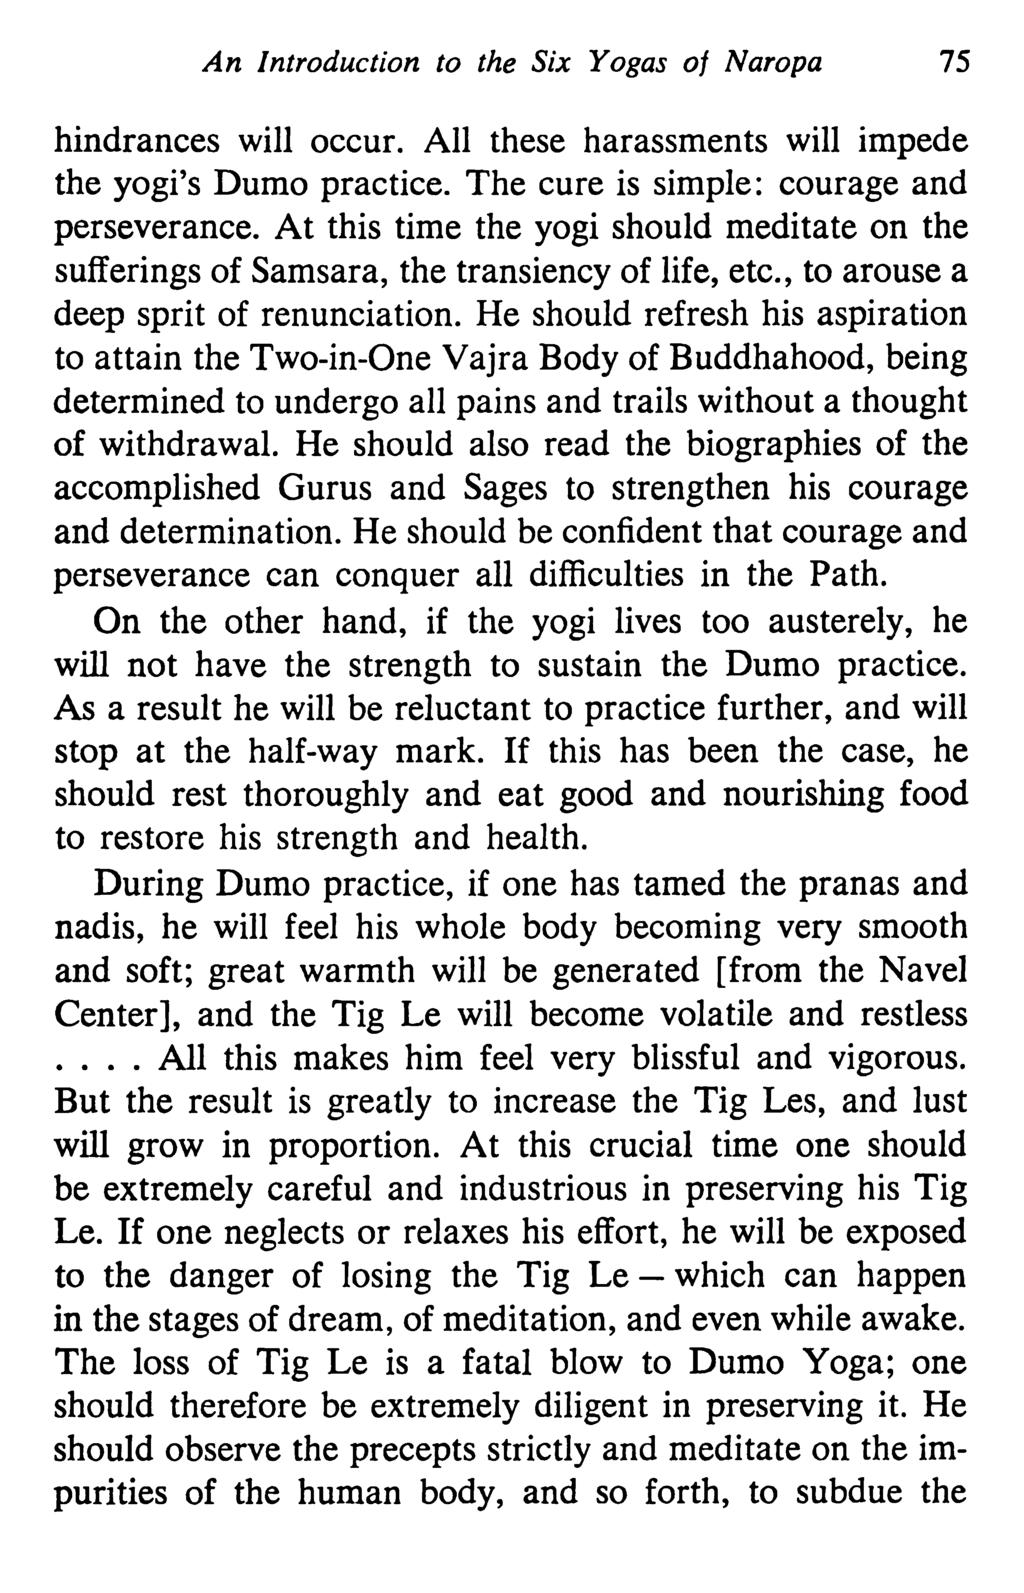 An Introduction to the Six Yogas of Naropa 75 hindrances will occur. All these harassments will impede the yogi's Dumo practice. The cure is simple: courage and perseverance.